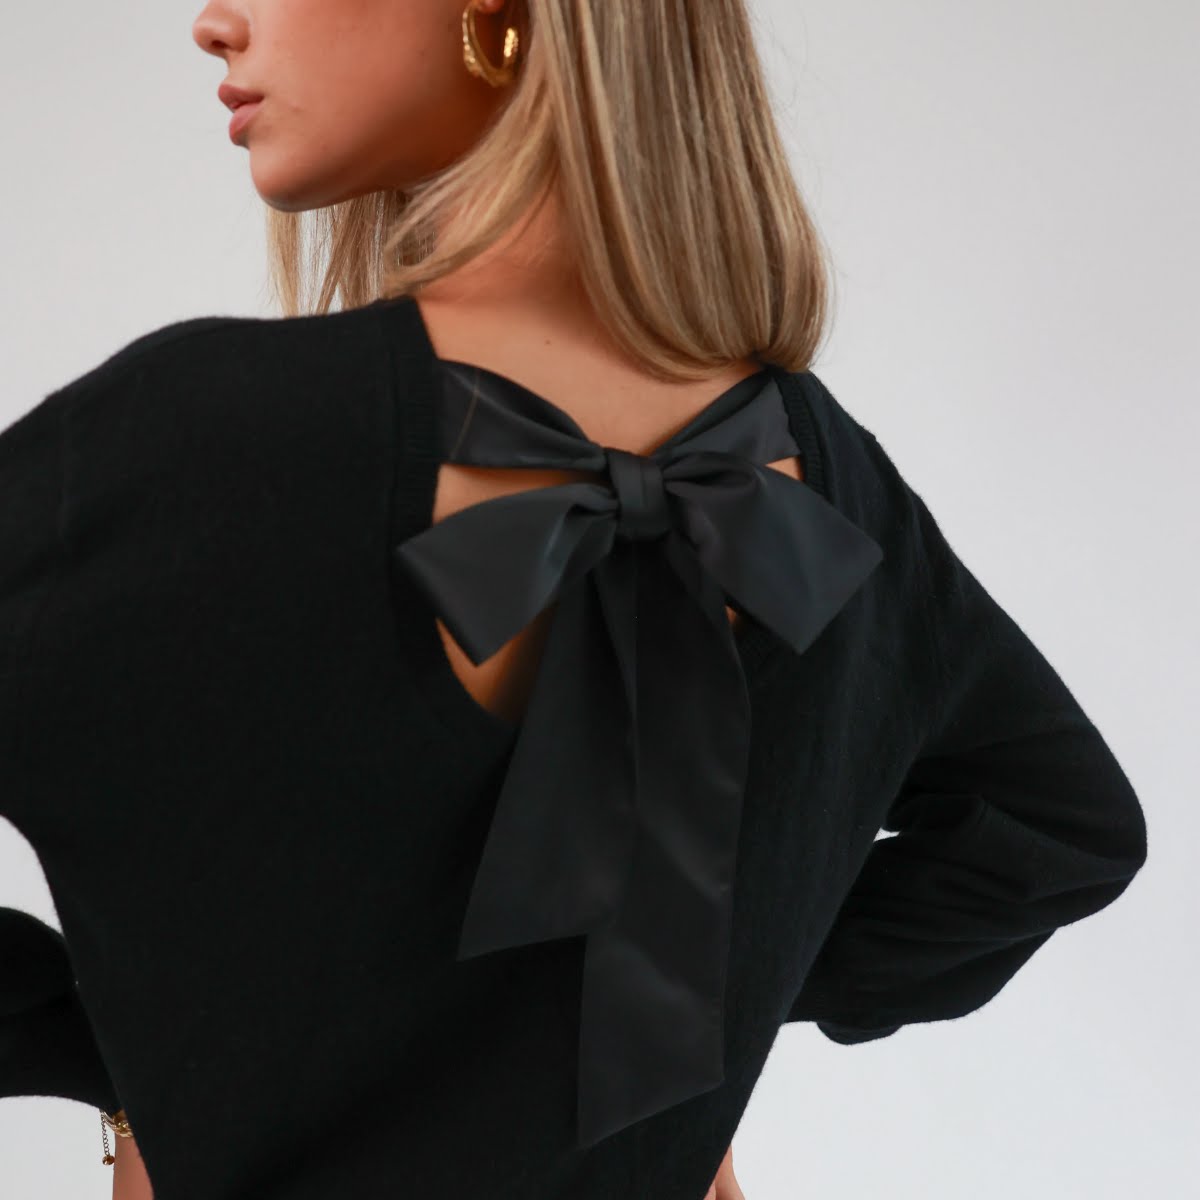 The Lily Cashmere Bow Back Sweater, €195, Sinead Keary